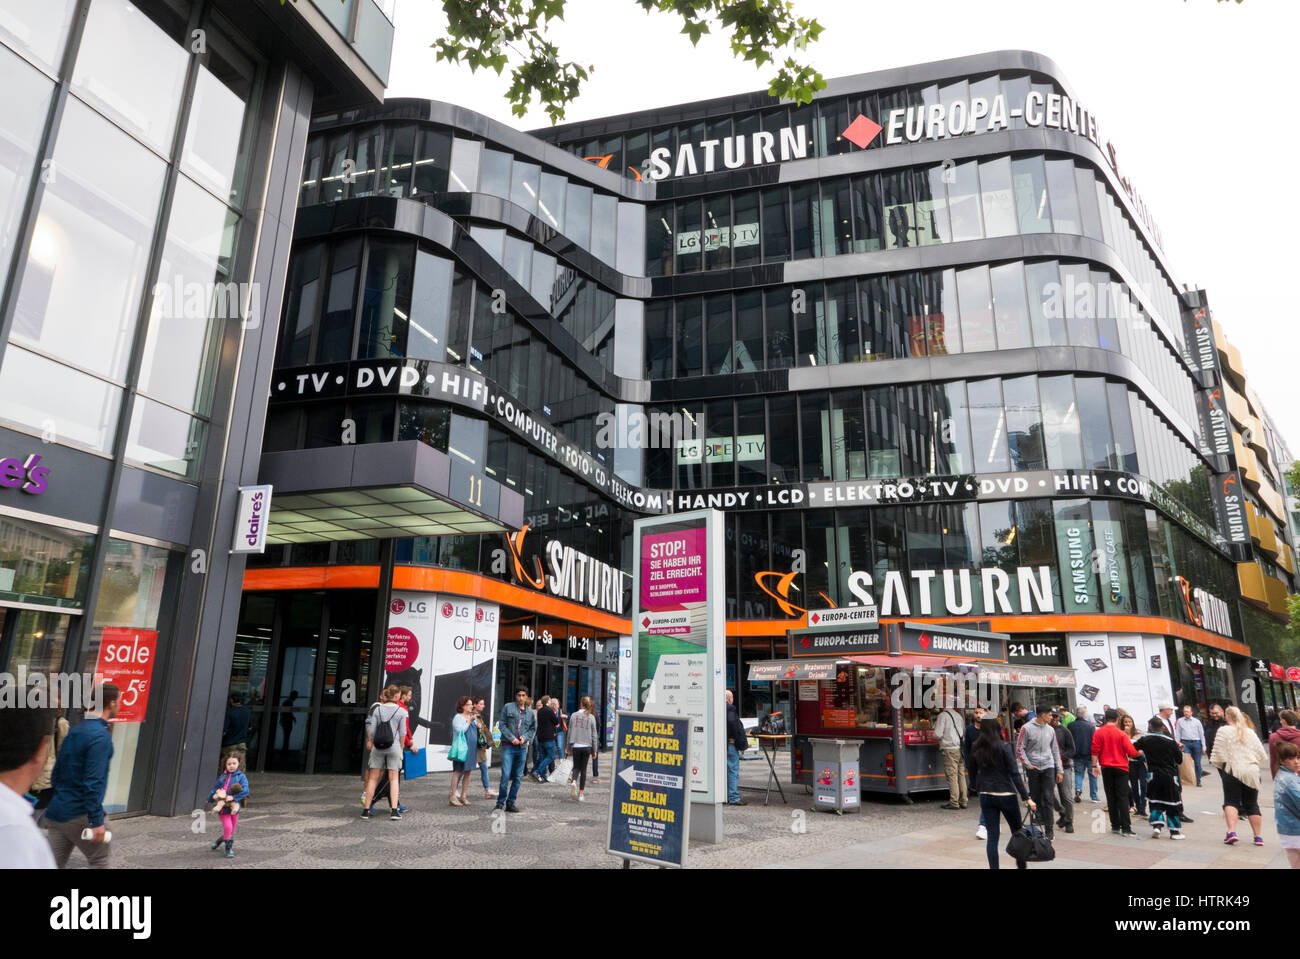 The exterior of the Europa Center with the Saturn Logo, Berlin, Germany Stock Photo